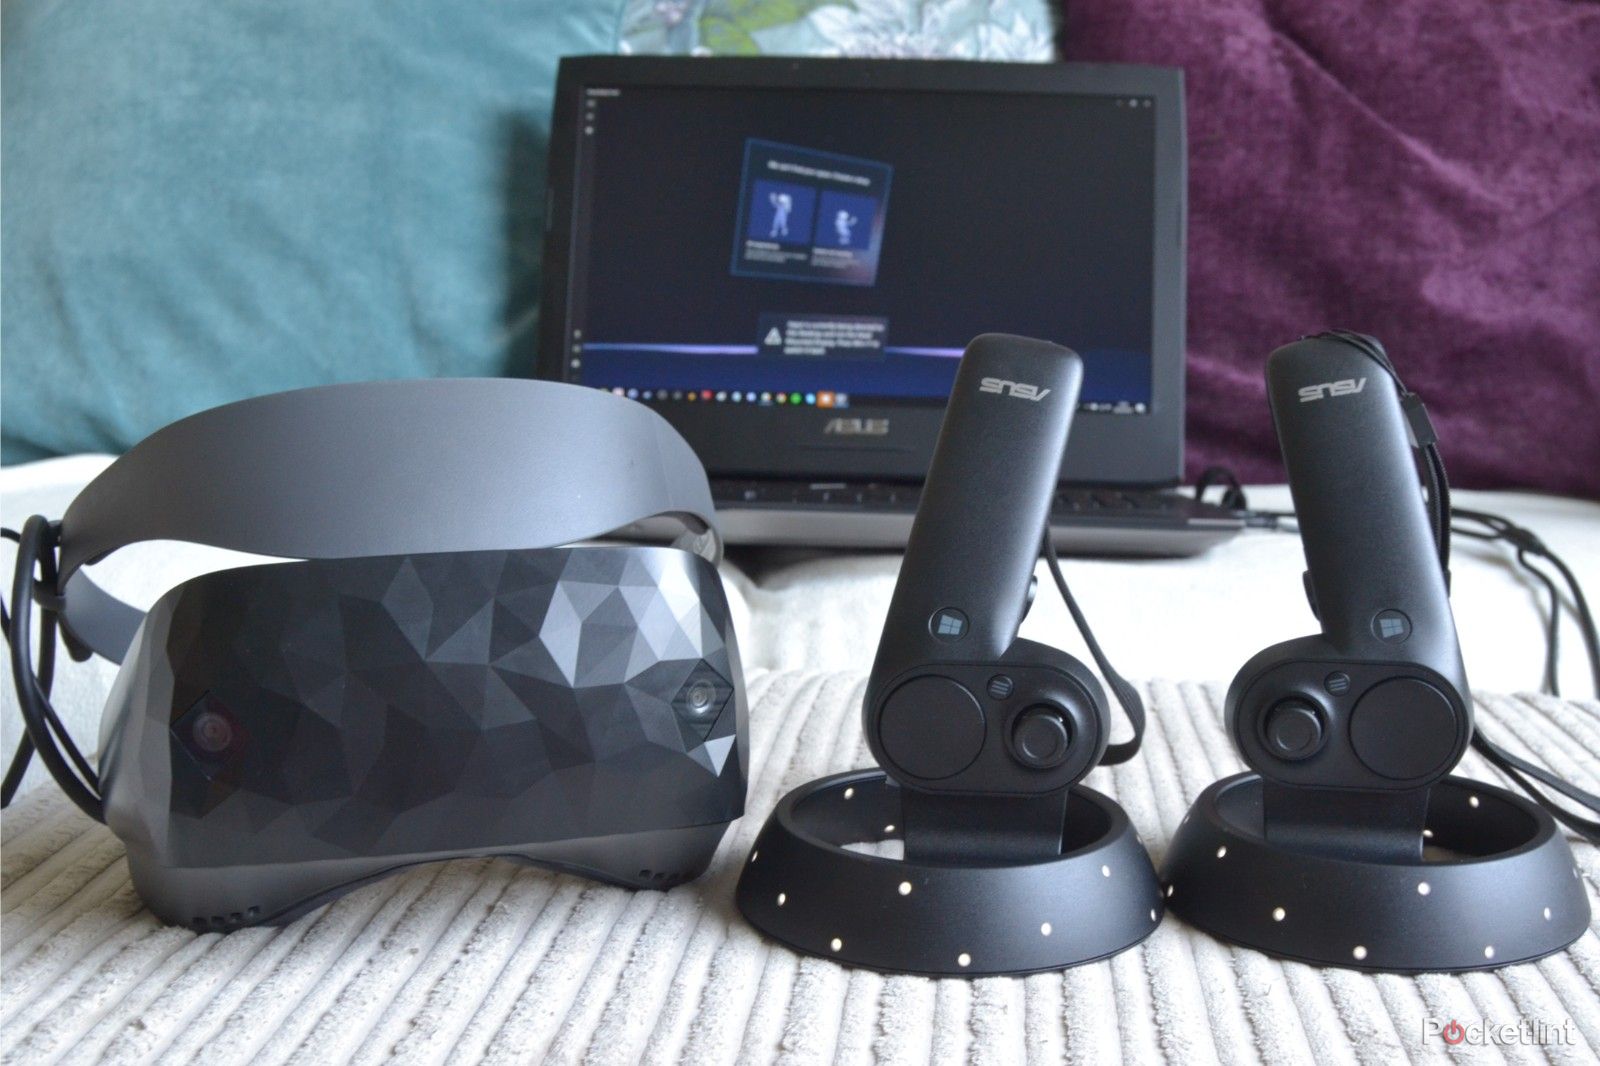 Windows Mixed Reality: is it which headsets available?